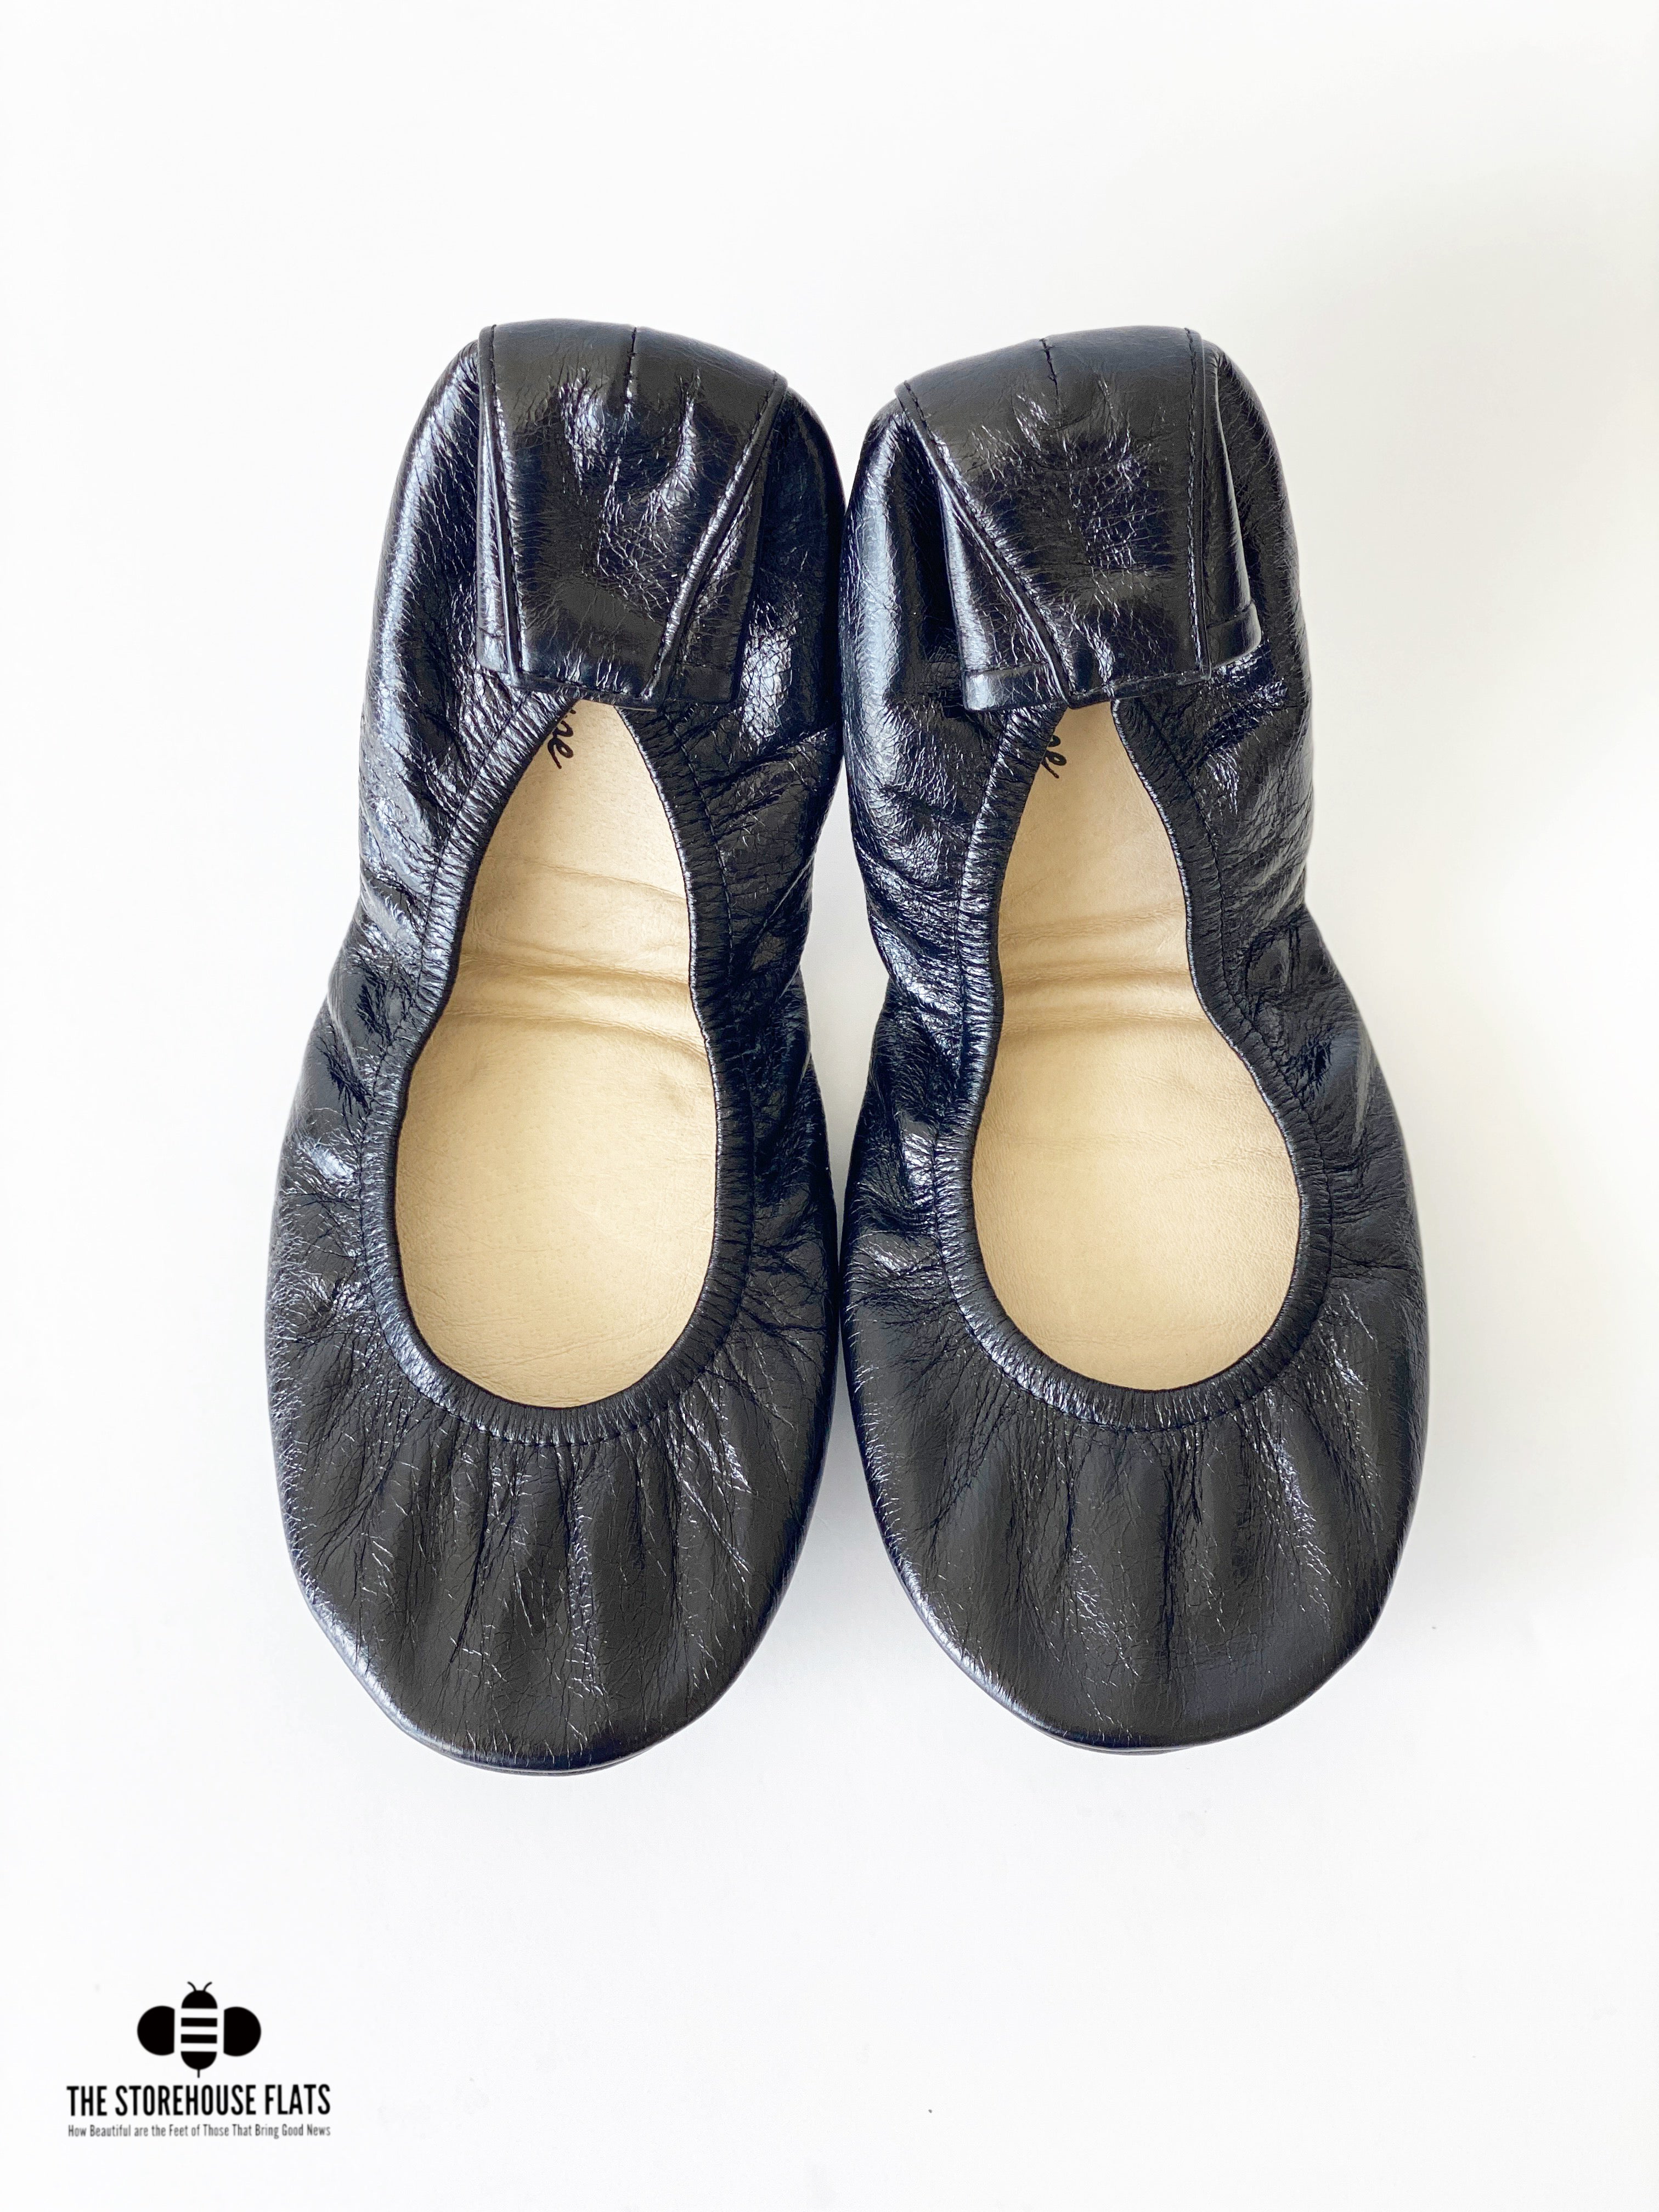 LICORICE BLACK OIL TANNED | IN STOCK - The Storehouse Flats